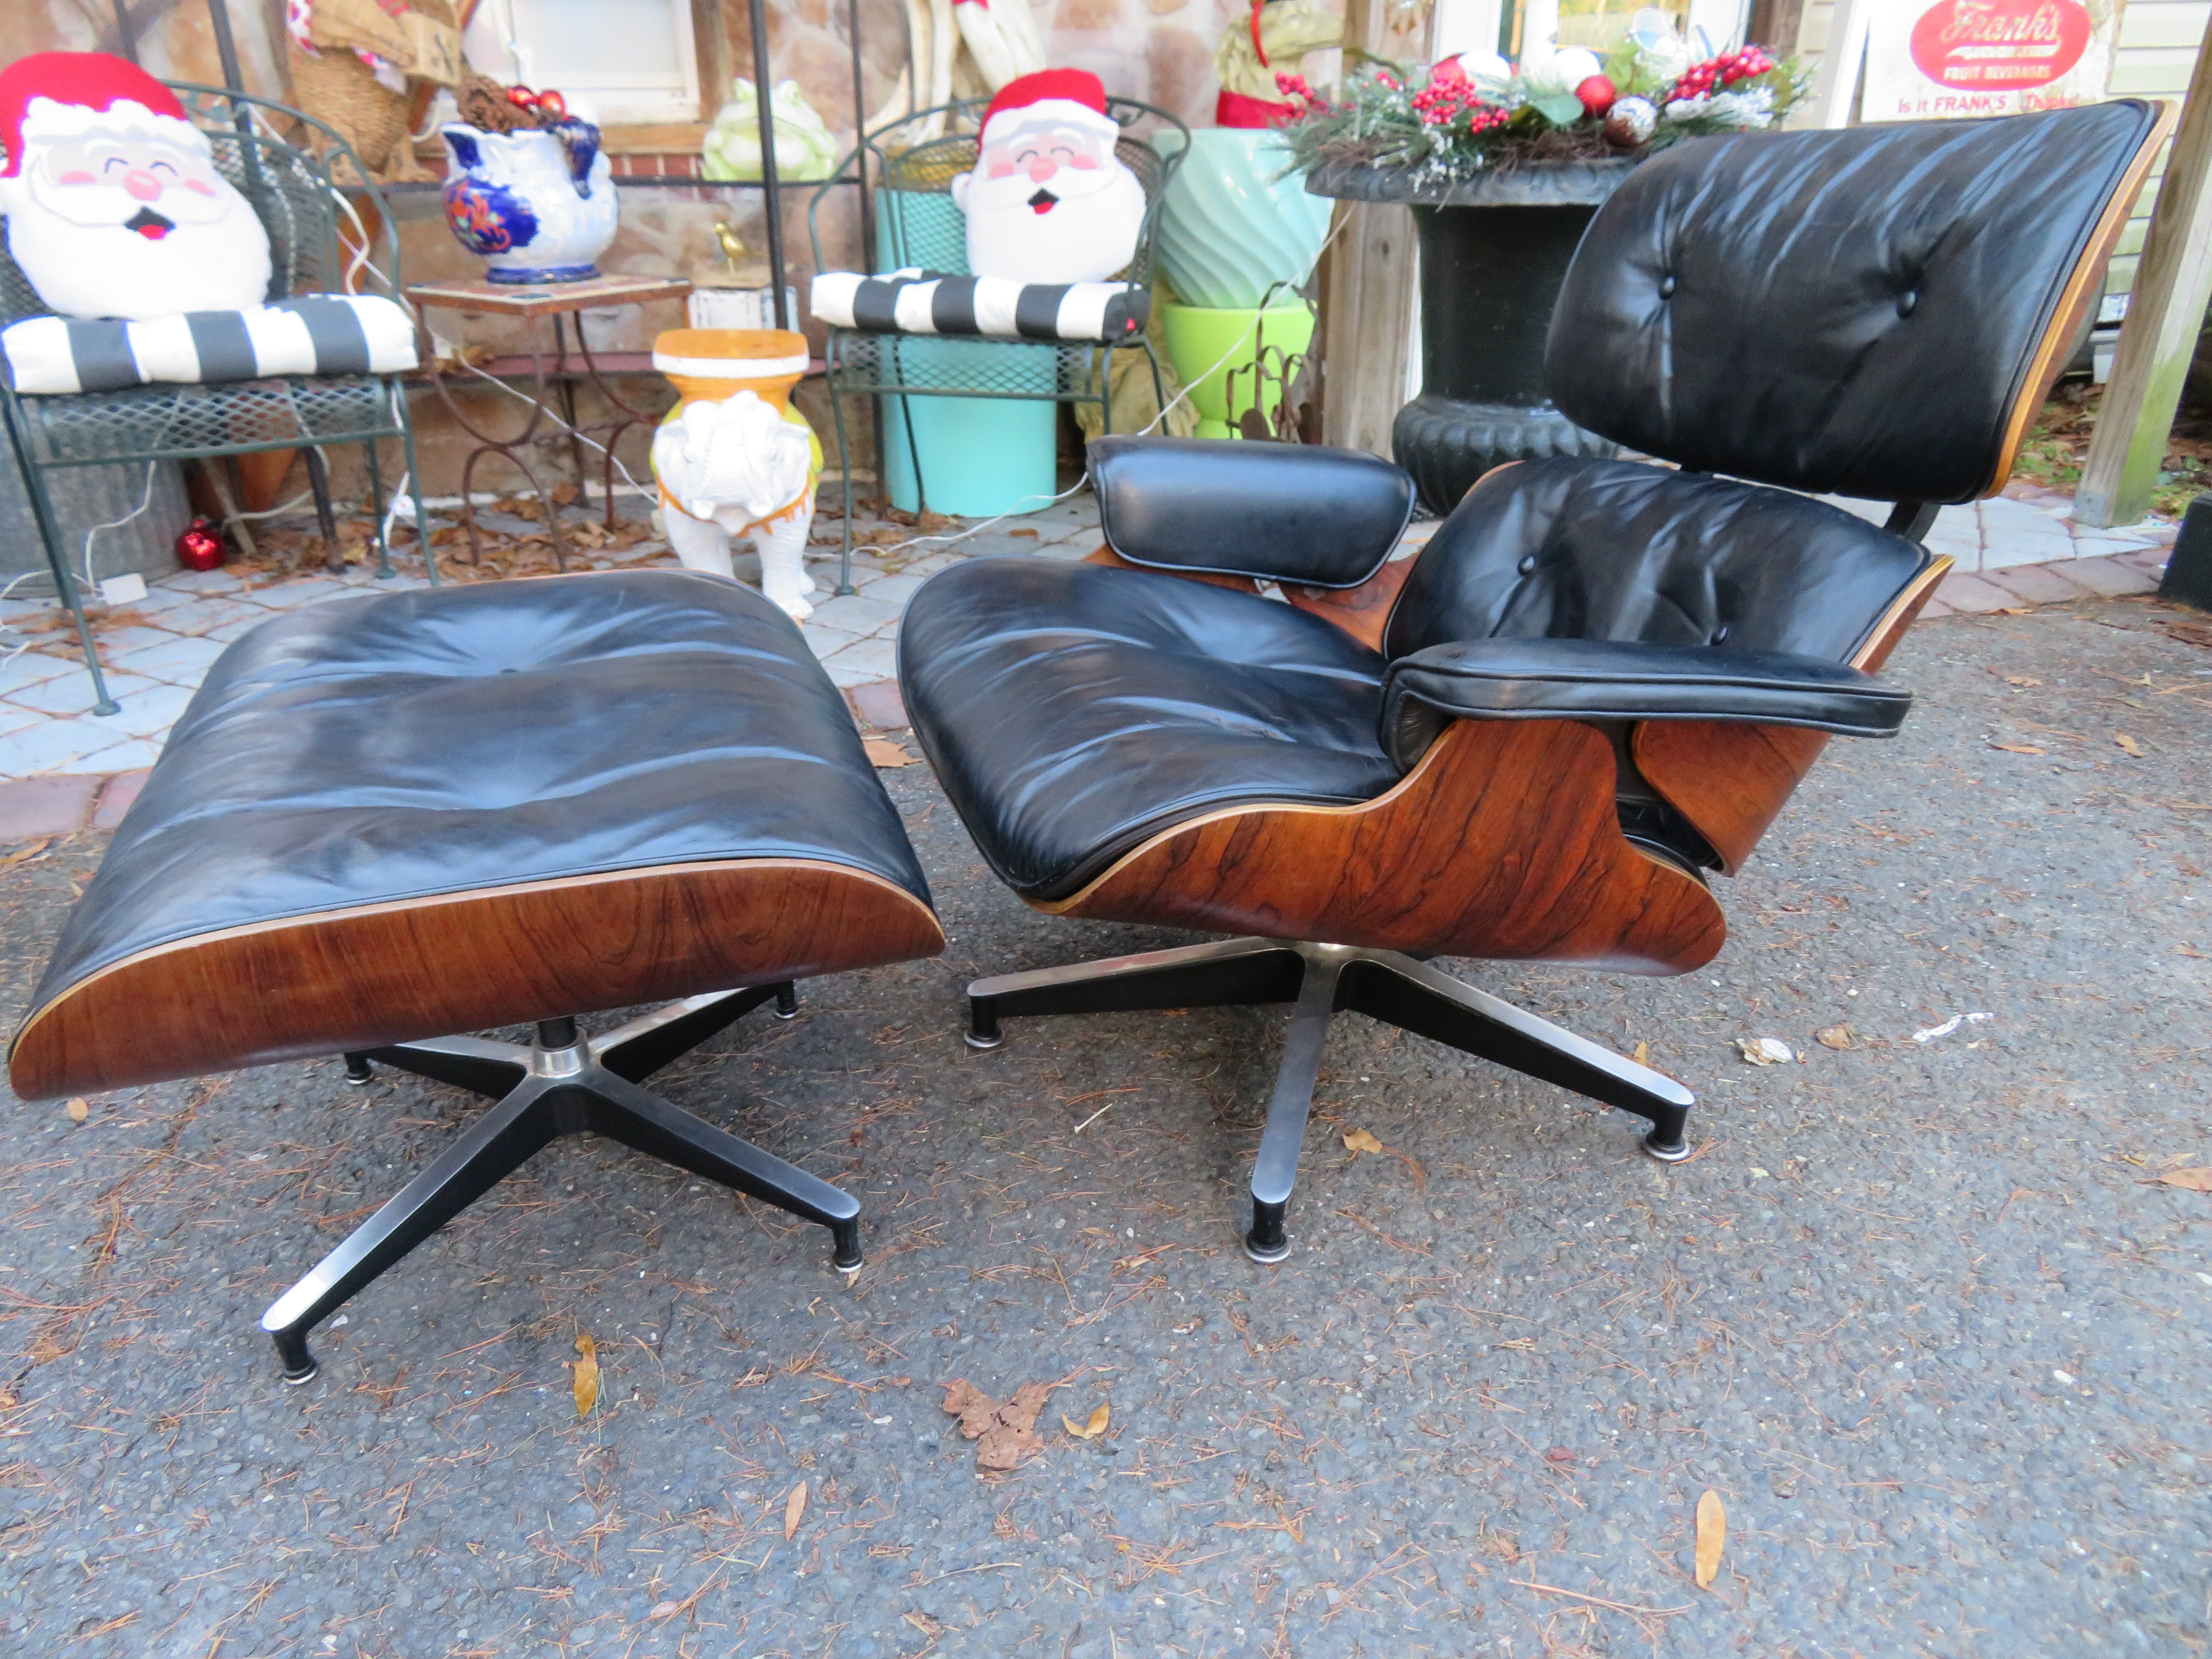 Handsome second-generation Charles and Ray Eames lounge chair with ottoman by Herman Miller. Early 1960s production. The rosewood has a beautiful wood grain and rich color with some light wear and is in very good condition. The black leather has a